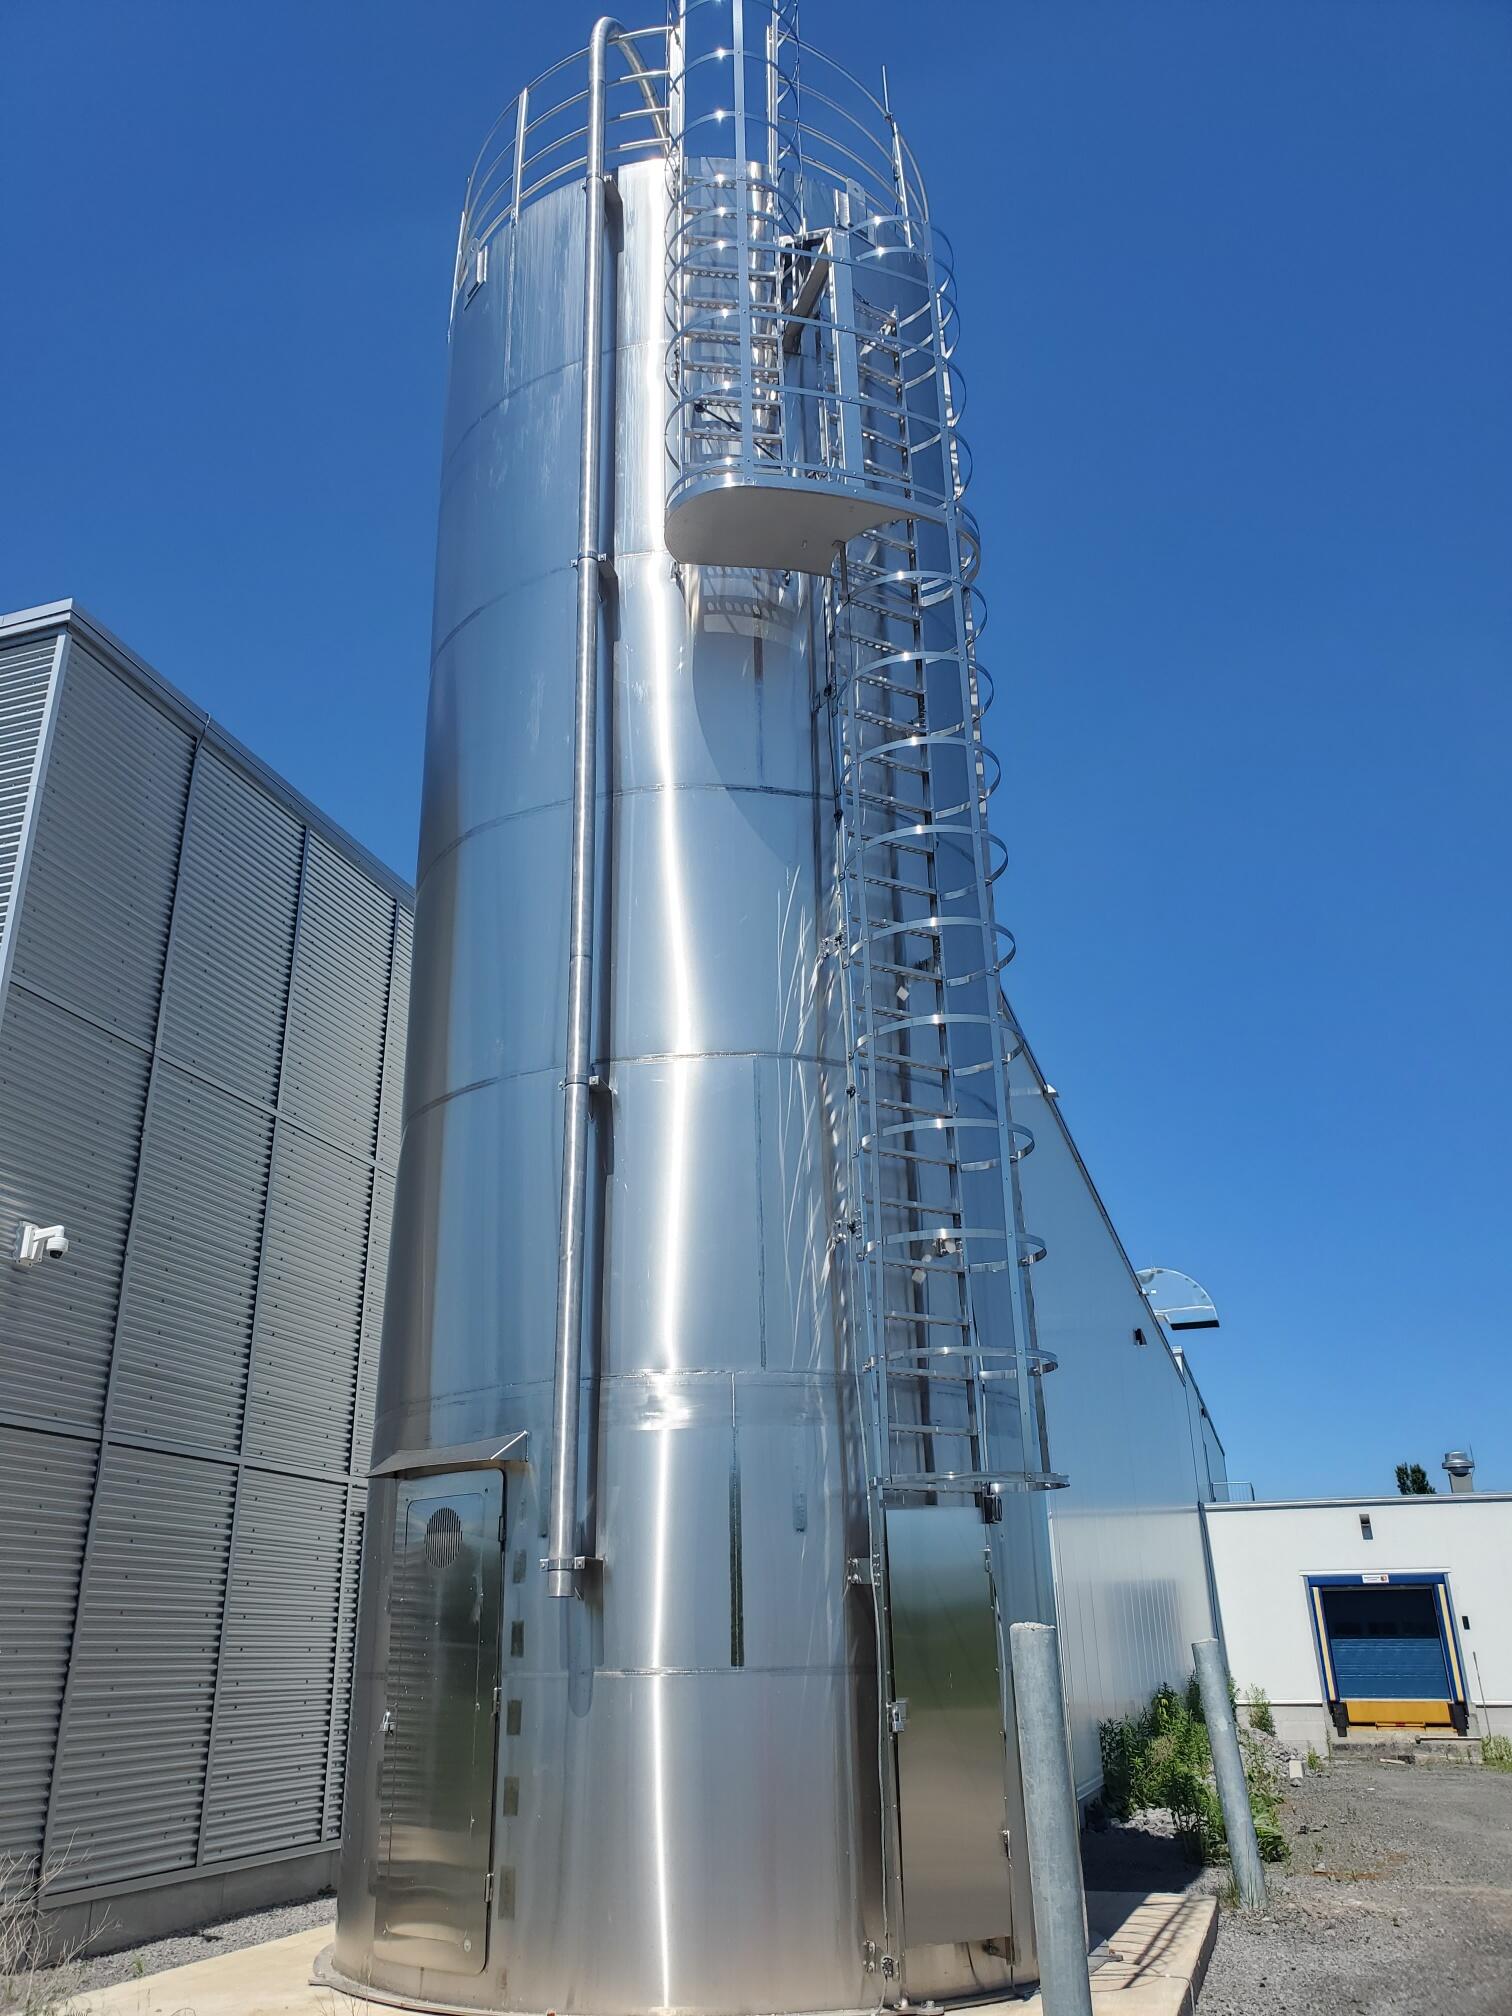 SILO: STAINLESS STEEL CONSTRUCTION 